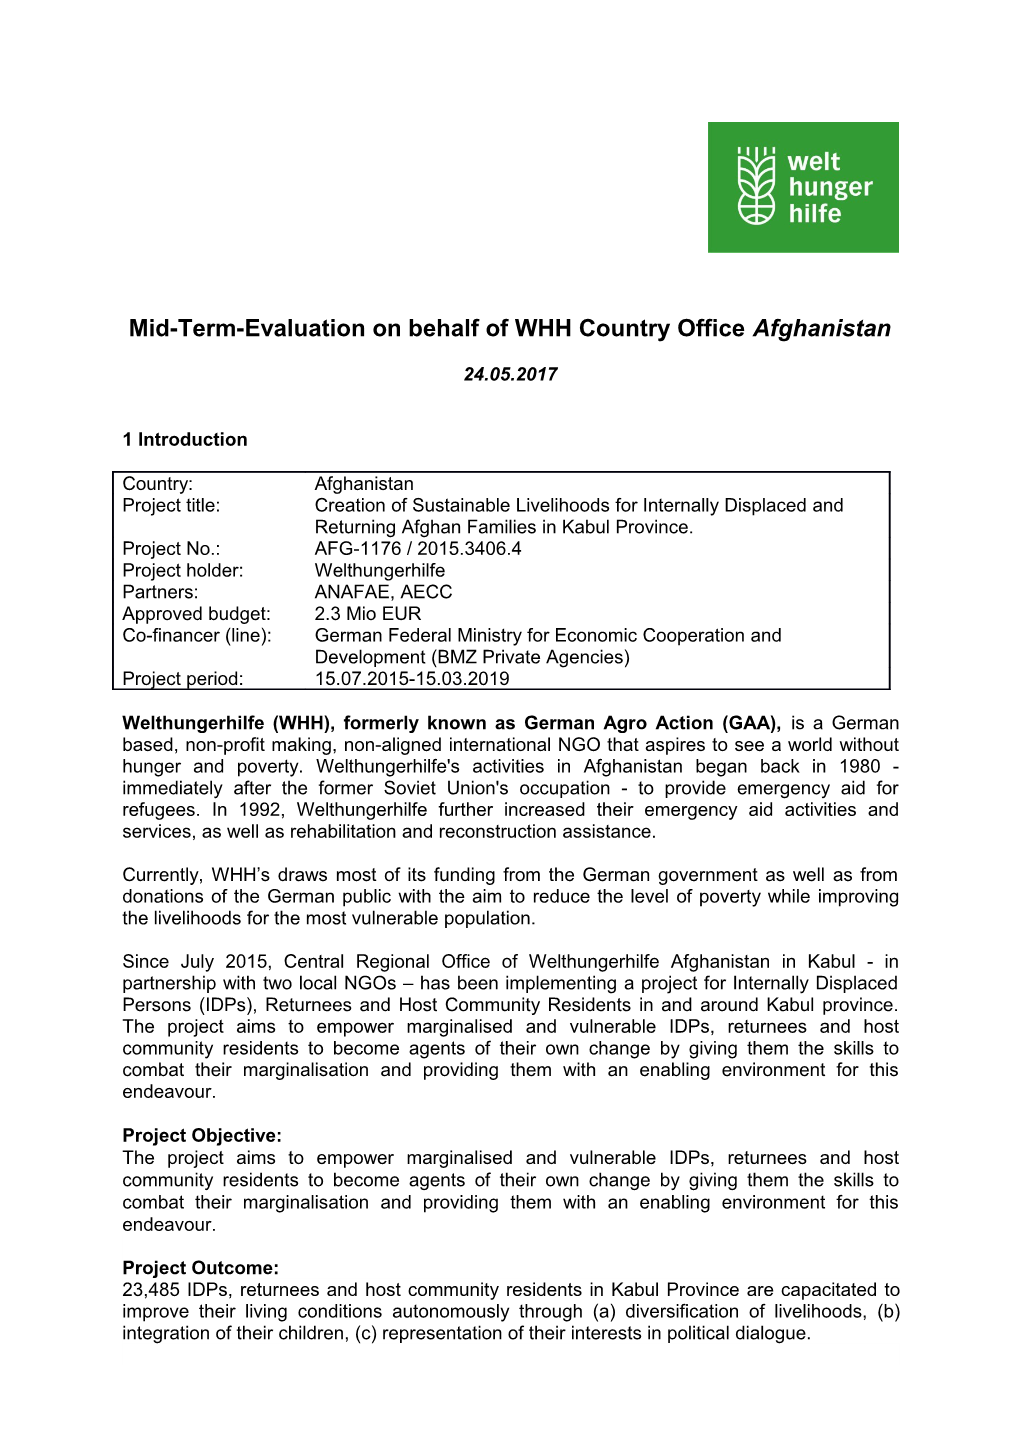 Mid-Term-Evaluation on Behalf of WHH Country Office Afghanistan